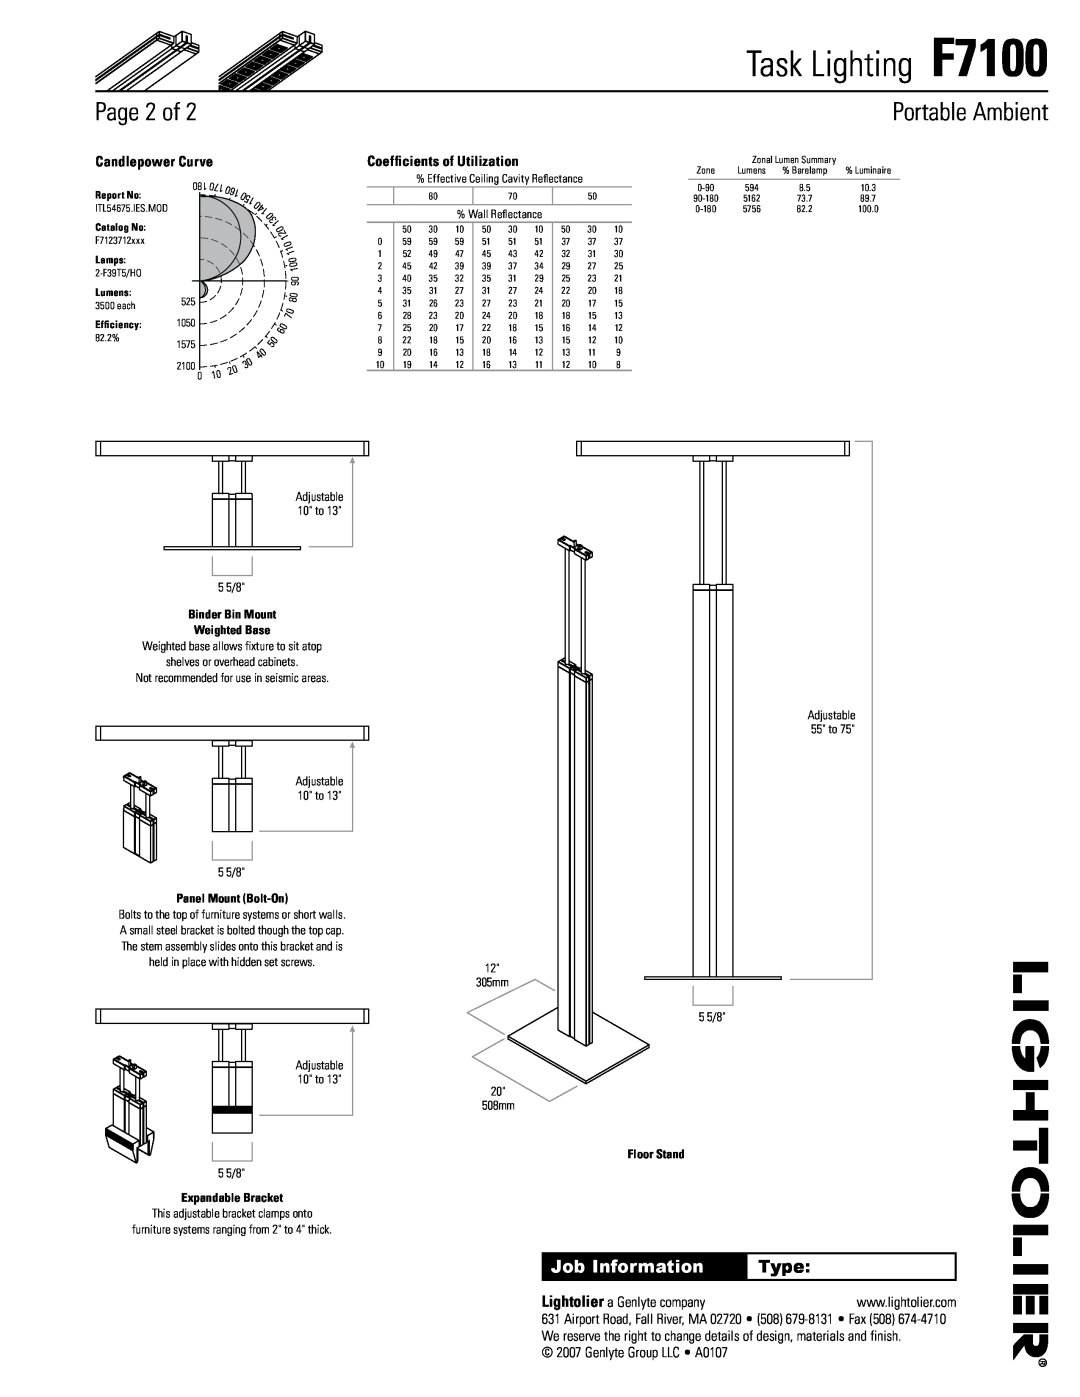 Lightolier specifications Task Lighting F7100, Page of, Portable Ambient, Job Information, Type, Candlepower Curve 